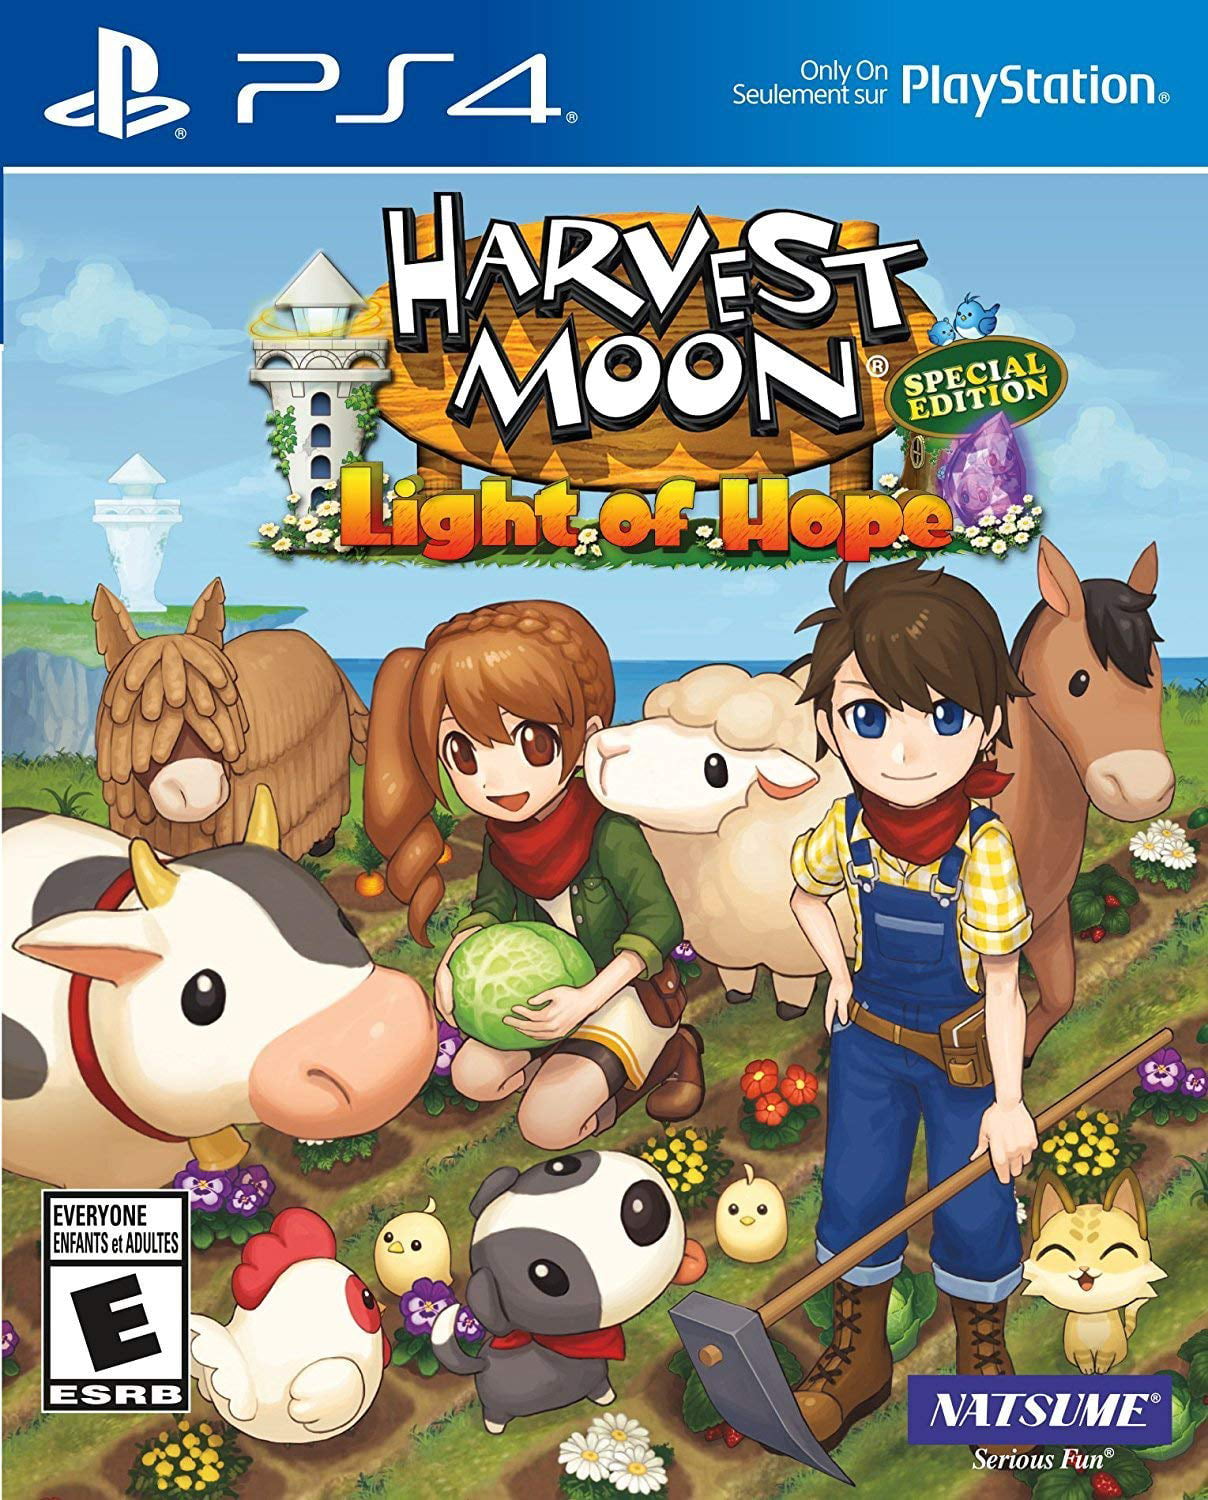 Harvest Moon: Light of Hope Special Edition - PlayStation 4, Collect important materials to rebuild the town and restore the lighthouse! By Brand Natsume